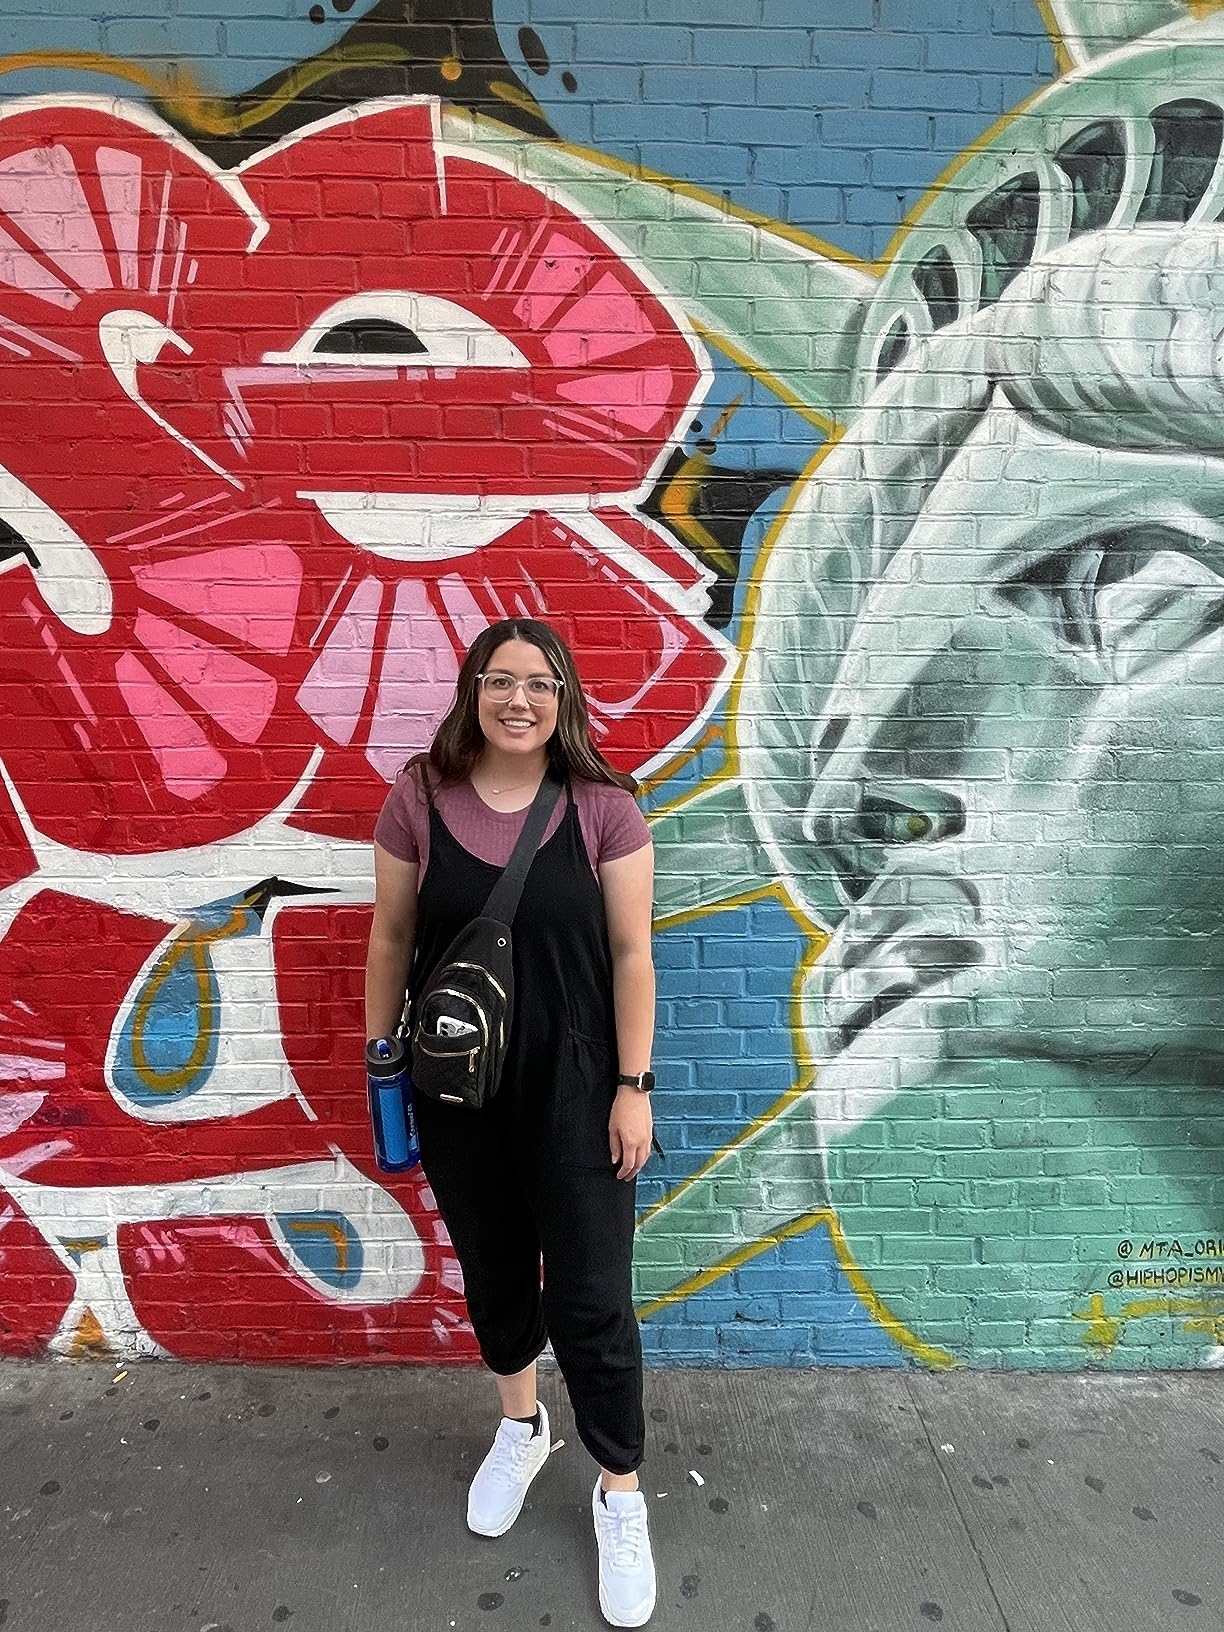 Person standing in front of a mural with the Statue of Liberty and flowers. They are wearing a red shirt and black overalls, holding a water bottle